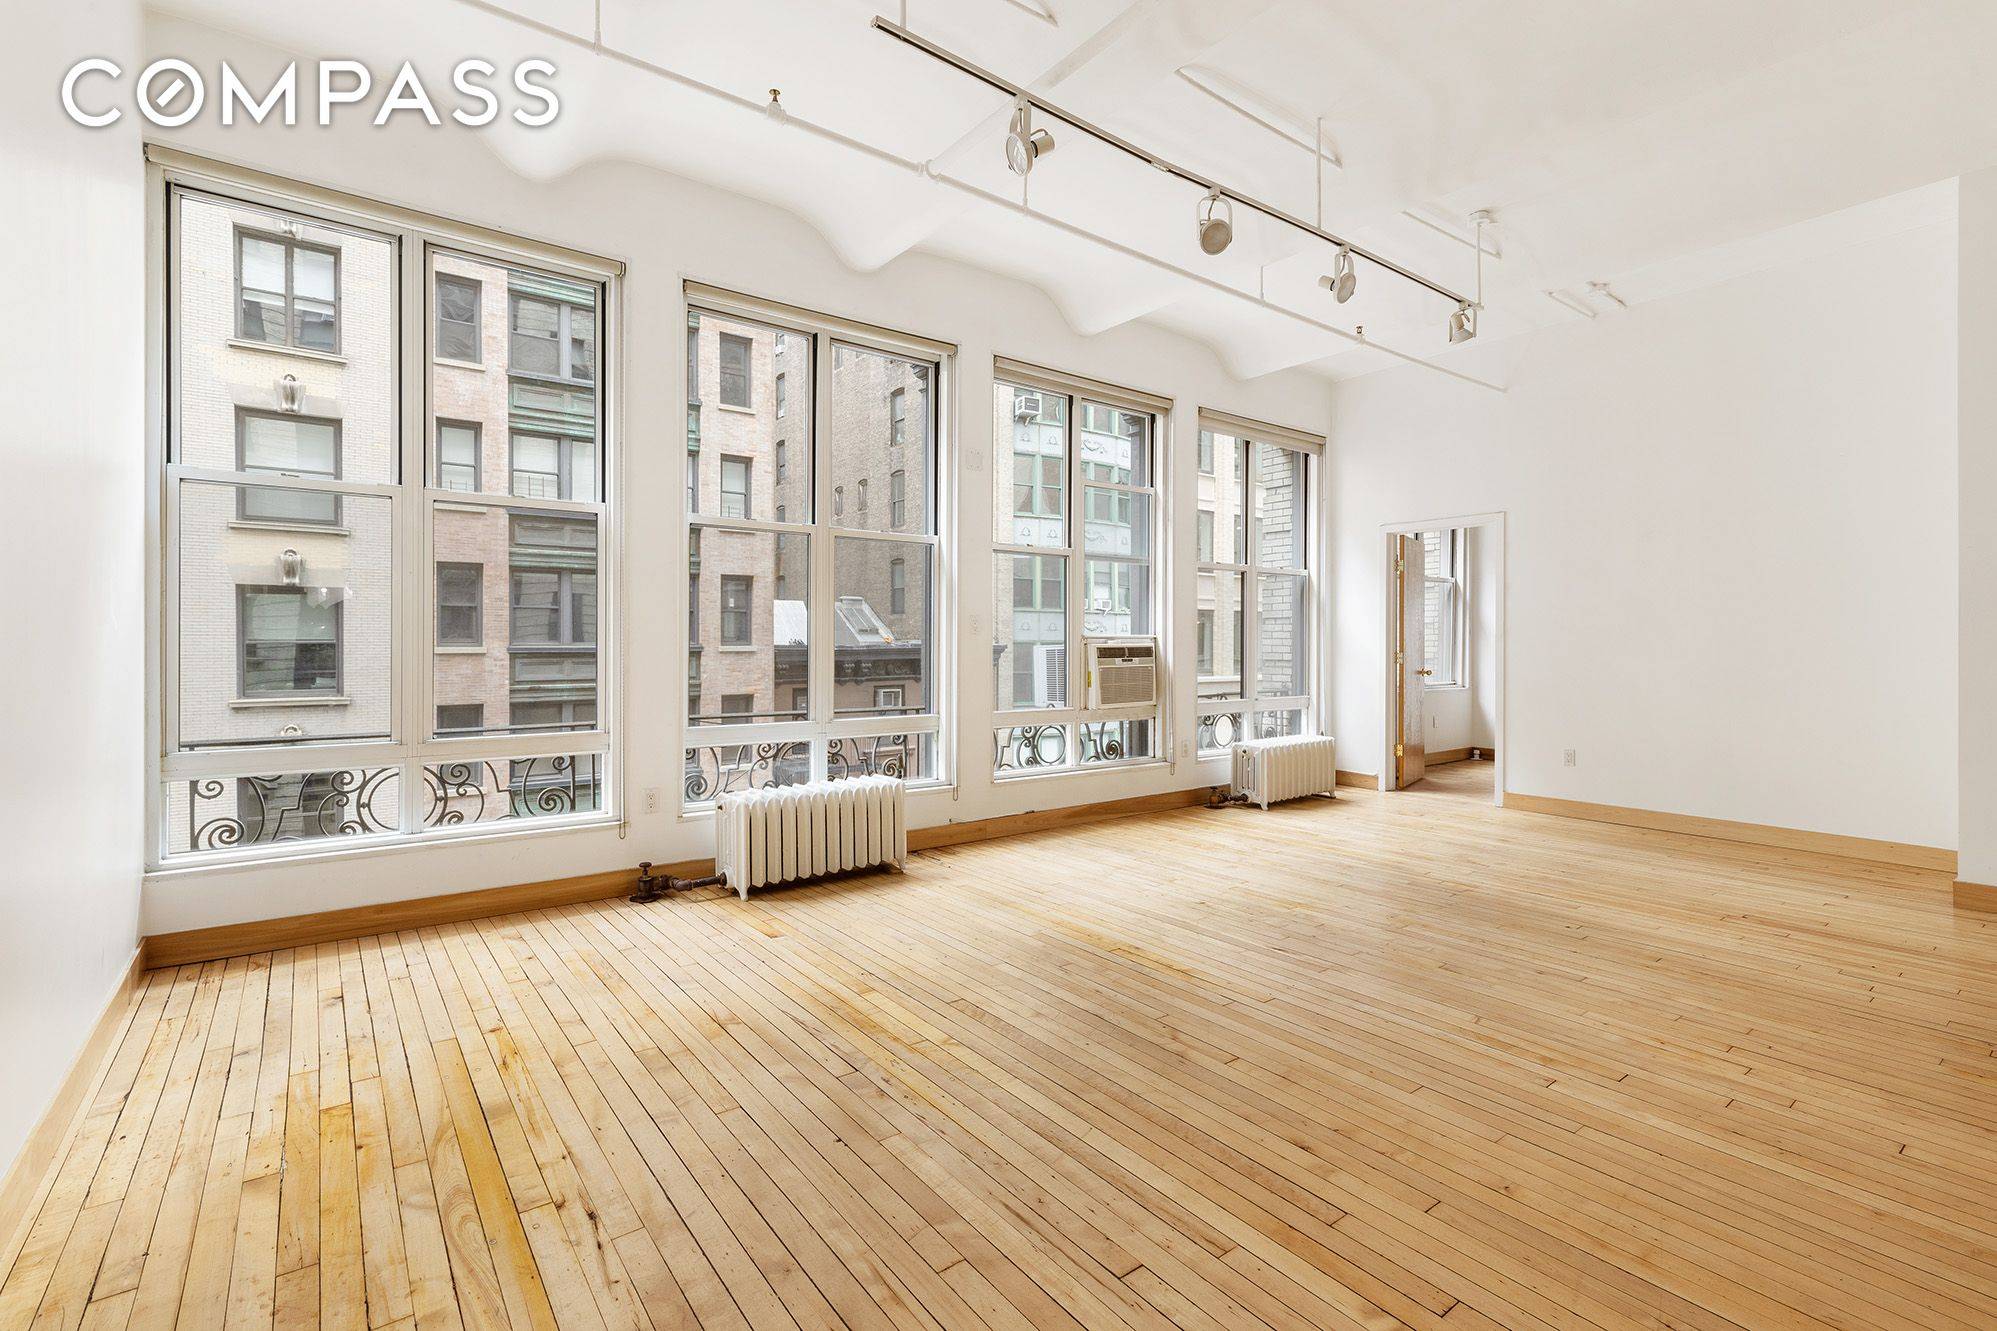 Step off the key lock elevator in this 2 bedroom, 1 bathroom loft in the heart of Flatiron and immerse yourself in the breathtaking turn of the century details that ...